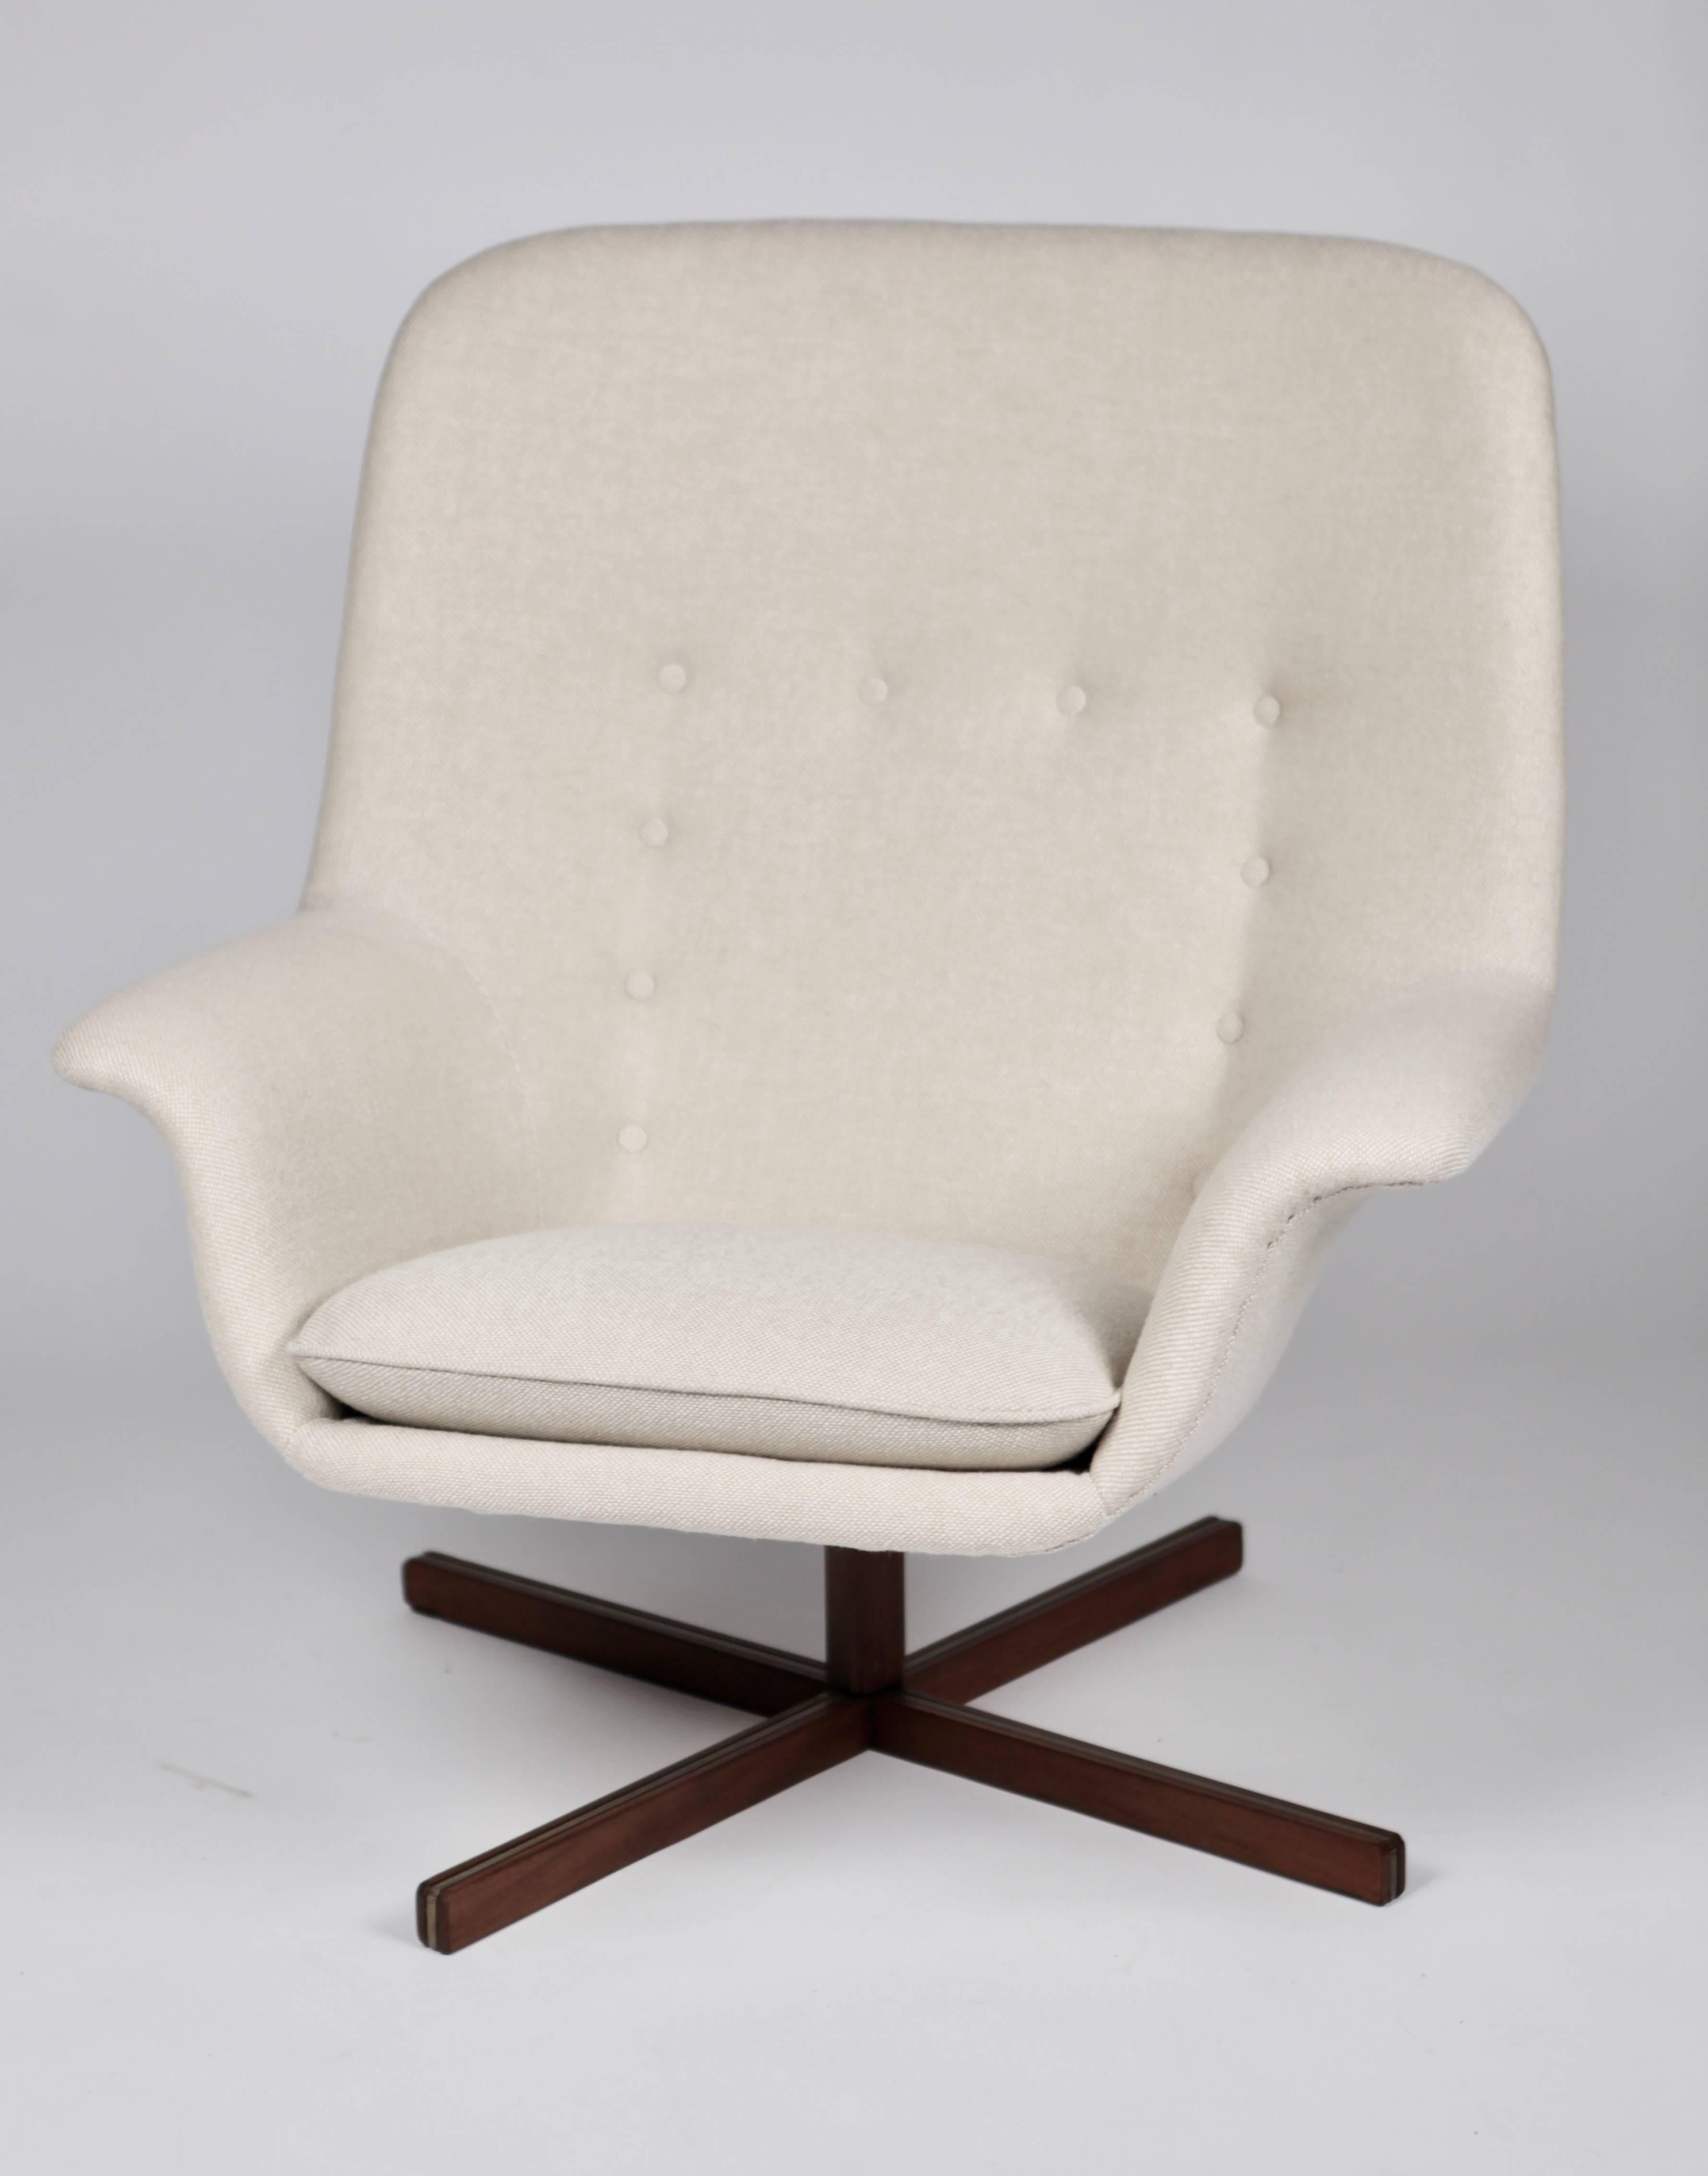 Carl Gustaf Hiort af Ornäs.
Revolving armchair, mod. Caravelle, designed by Carl Gustaf Hiort af Ornäs and manufactured by Puunveisto Oy, in Finland 1962.
Teak and upholstery.
Excellent condition and completely new upholstery.
Sleek 1960s design